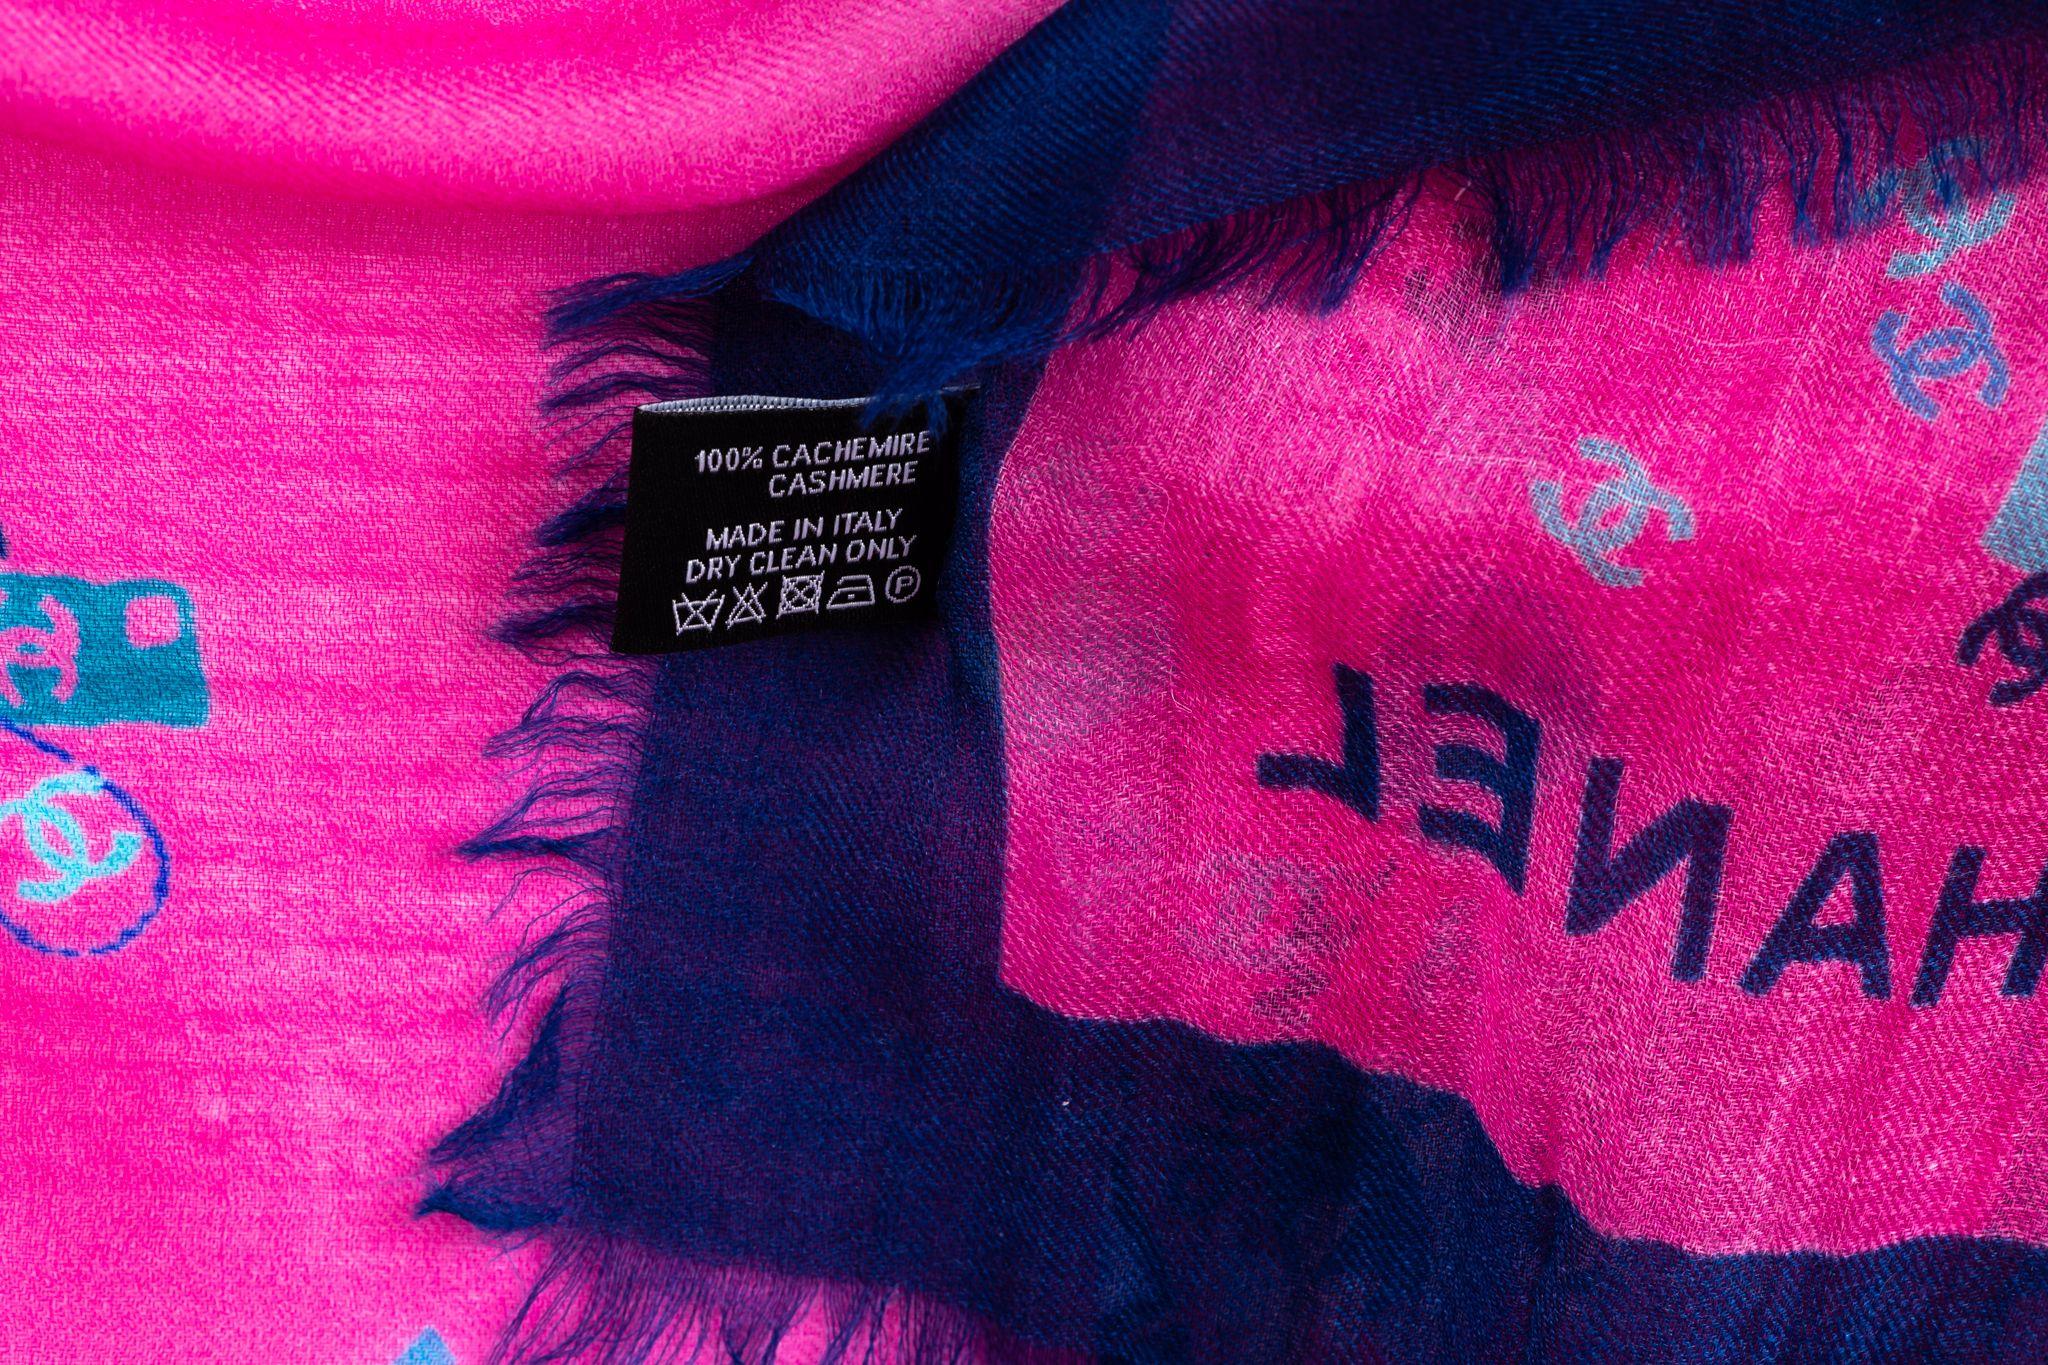 Chanel new lettering cashmere shawl in navy and fuchsia . Original care tag.
